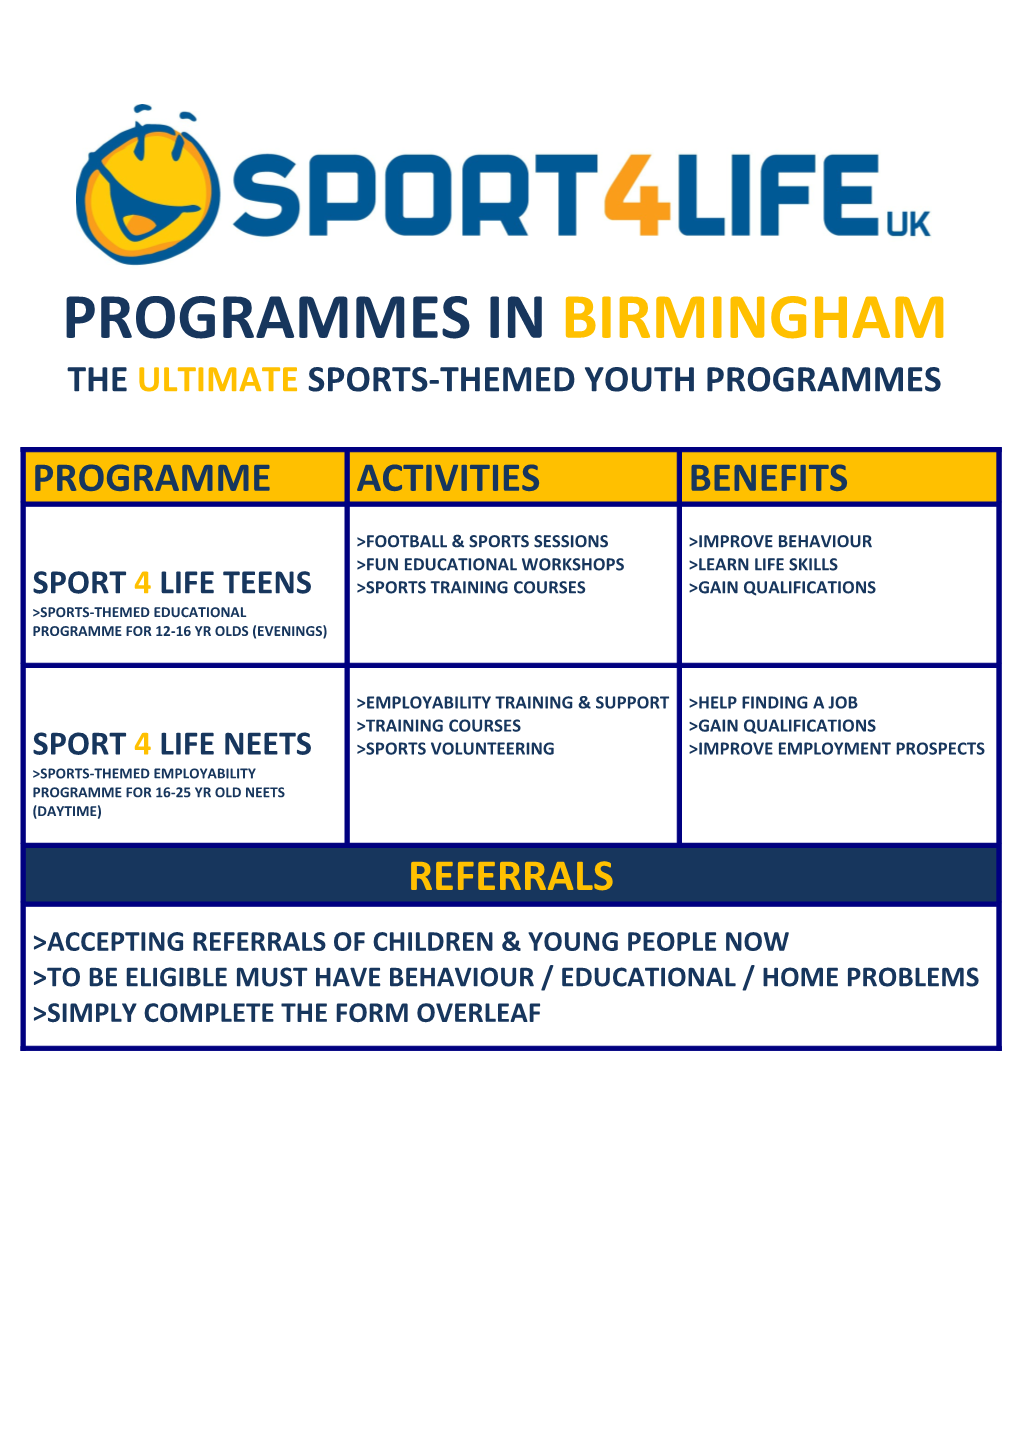 The Ultimate Sports-Themed Youth Programmes